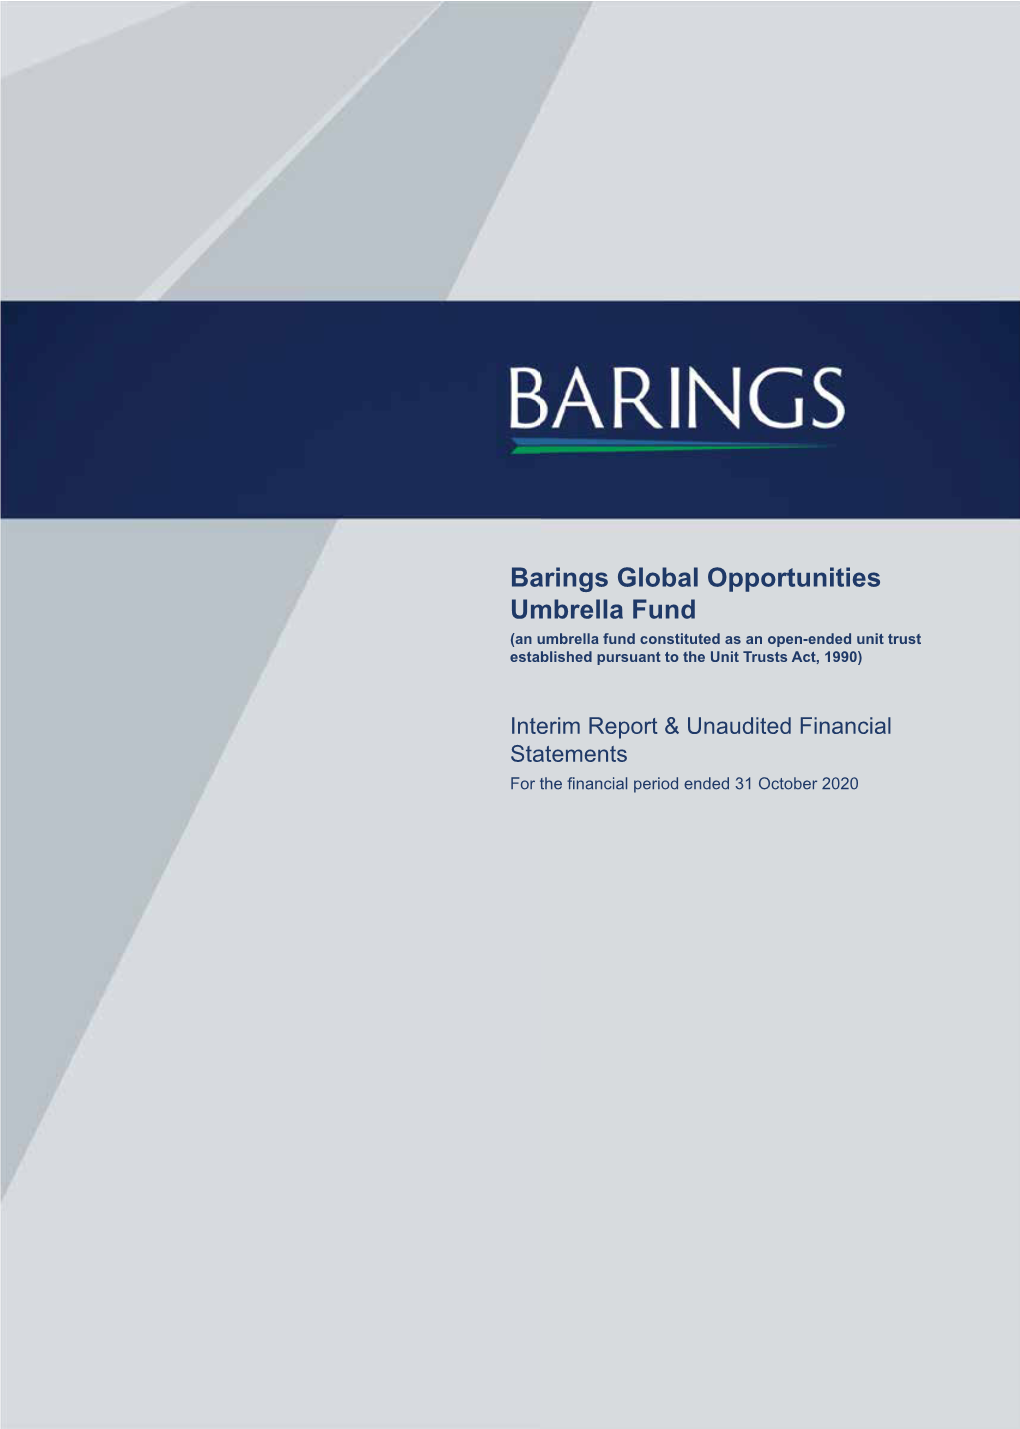 Barings Global Opportunities Umbrella Fund (An Umbrella Fund Constituted As an Open-Ended Unit Trust Established Pursuant to the Unit Trusts Act, 1990)